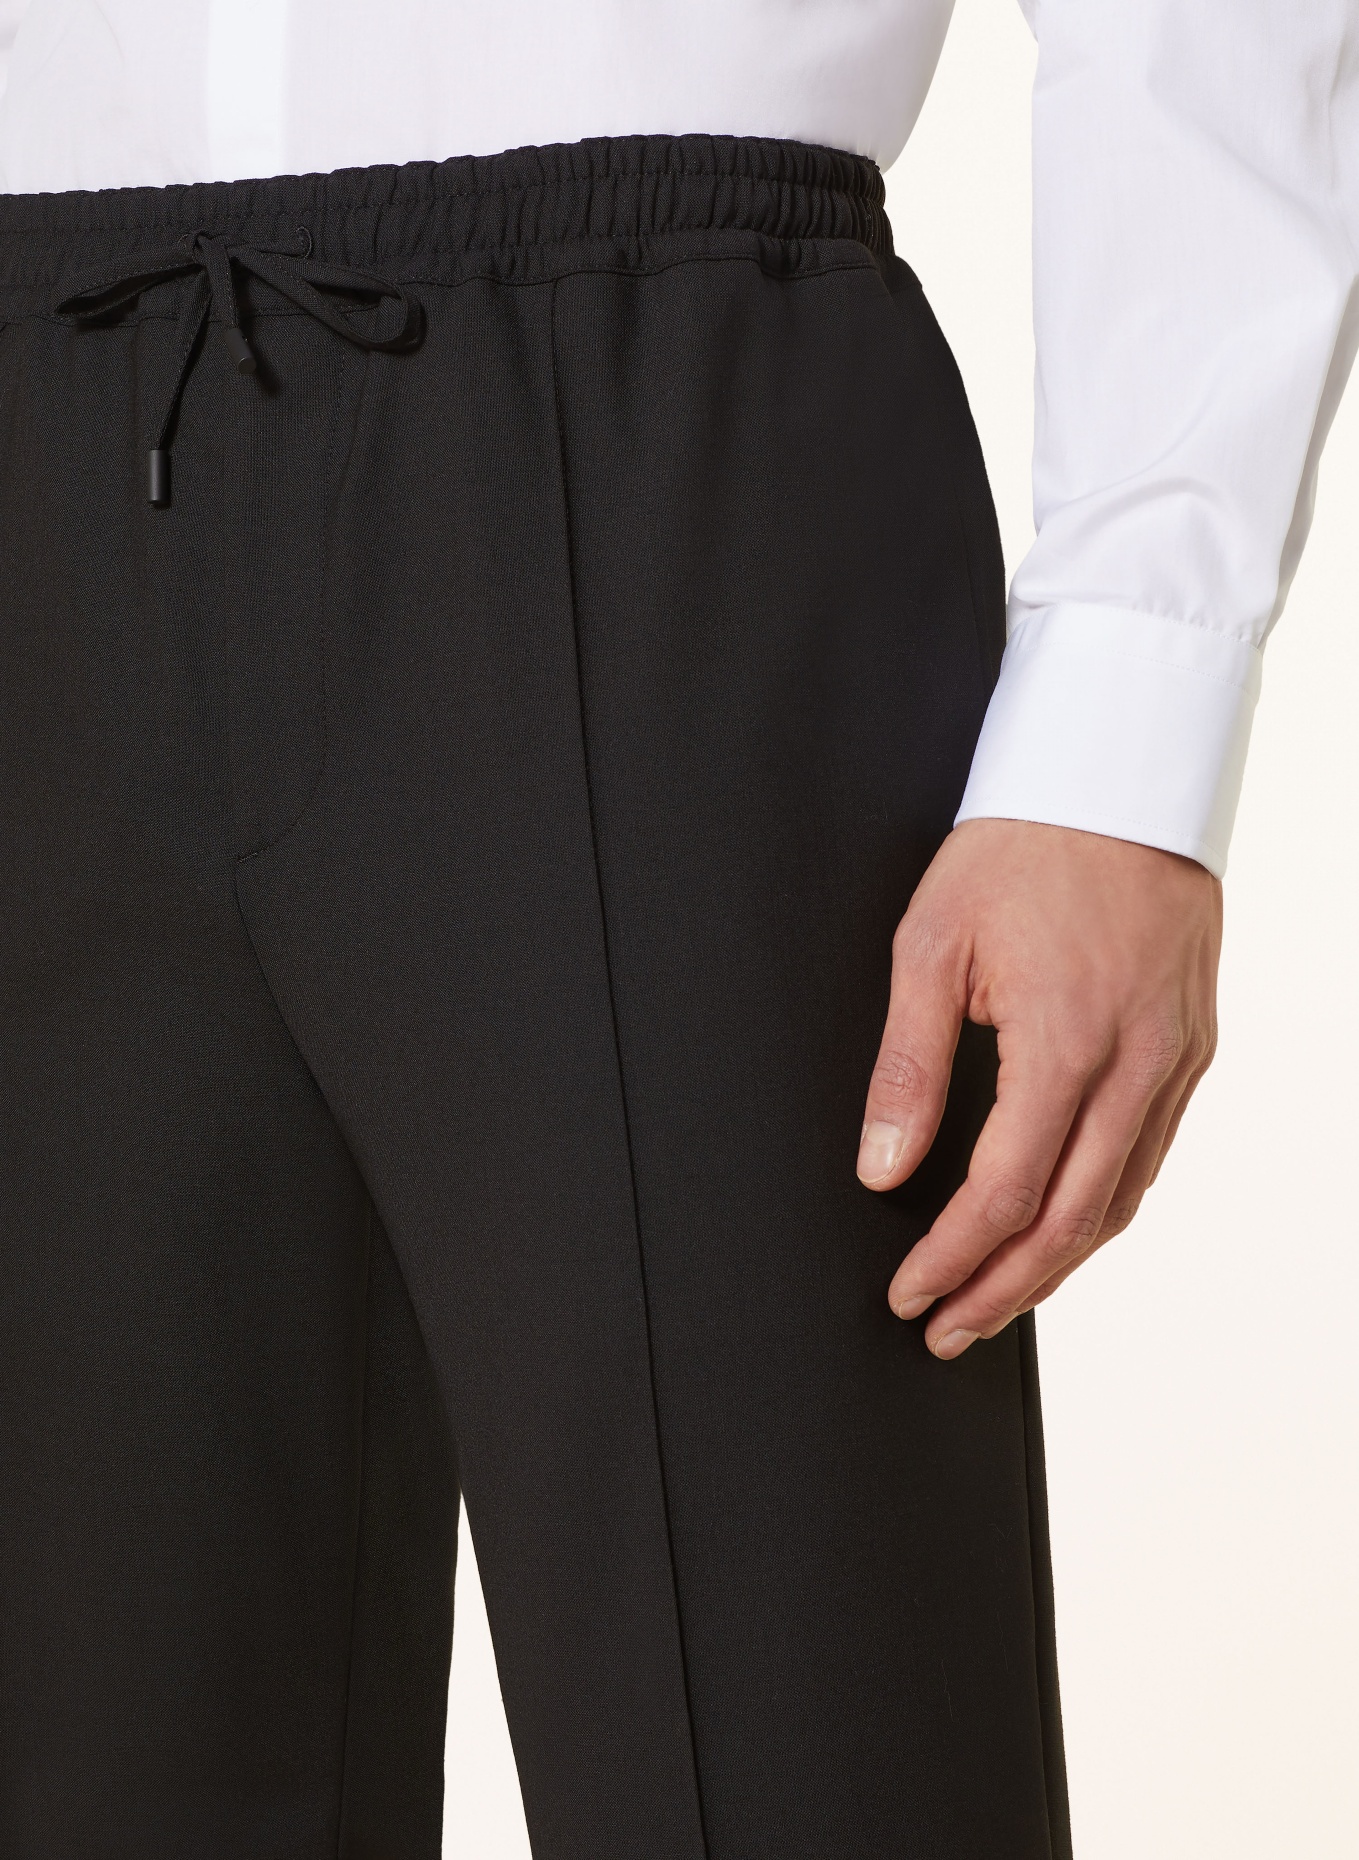 FENDI Pants in jogger style extra slim fit, Color: BLACK (Image 5)